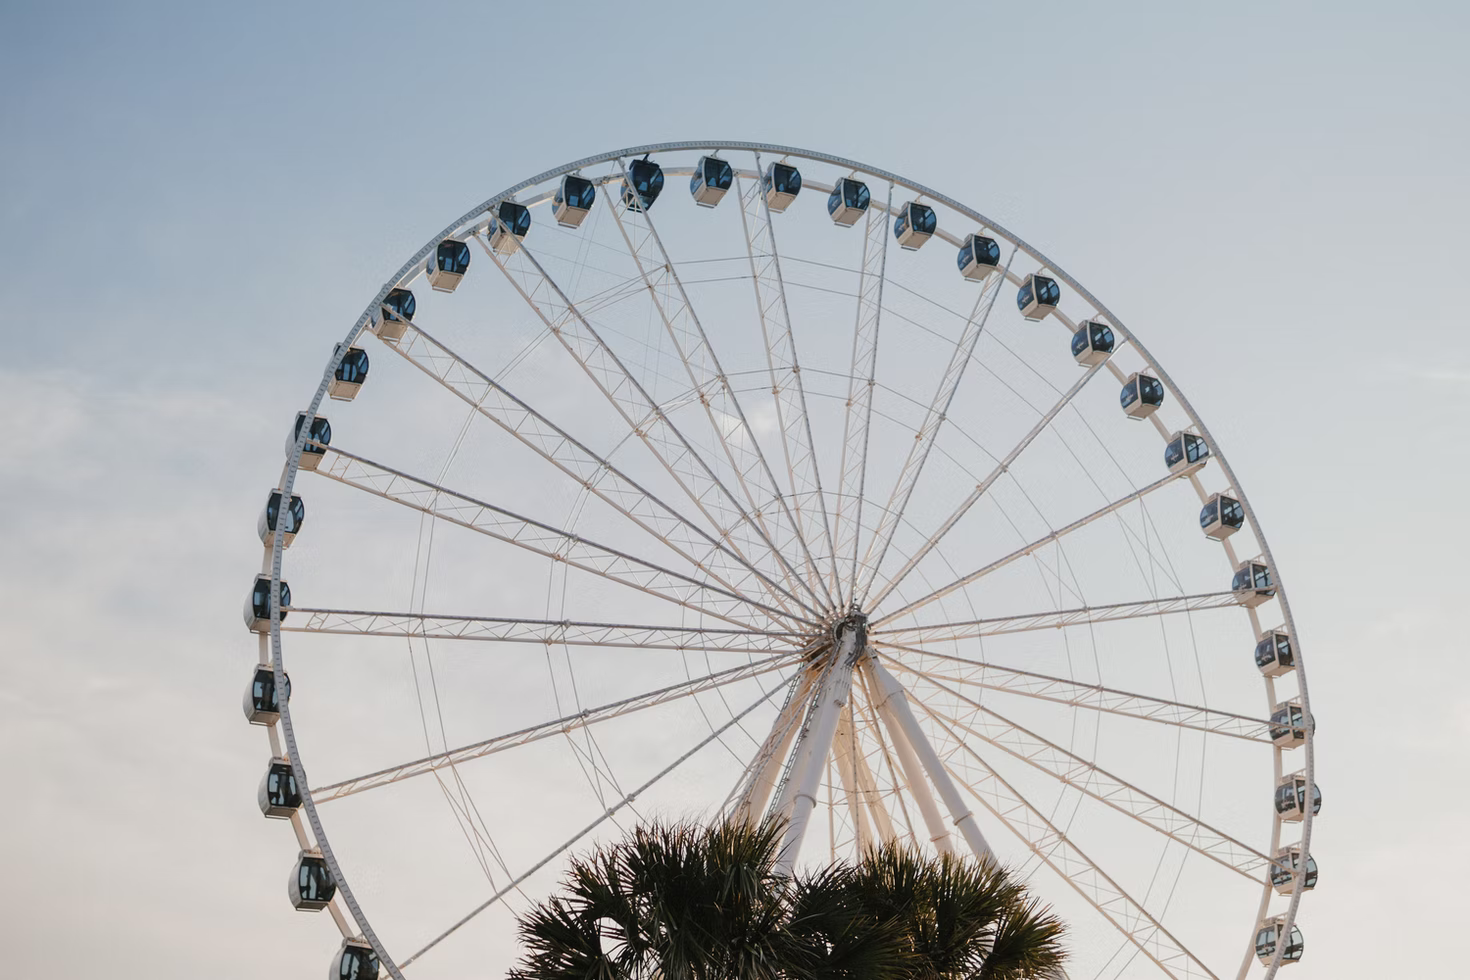 How to travel to Myrtle Beach from Charleston?